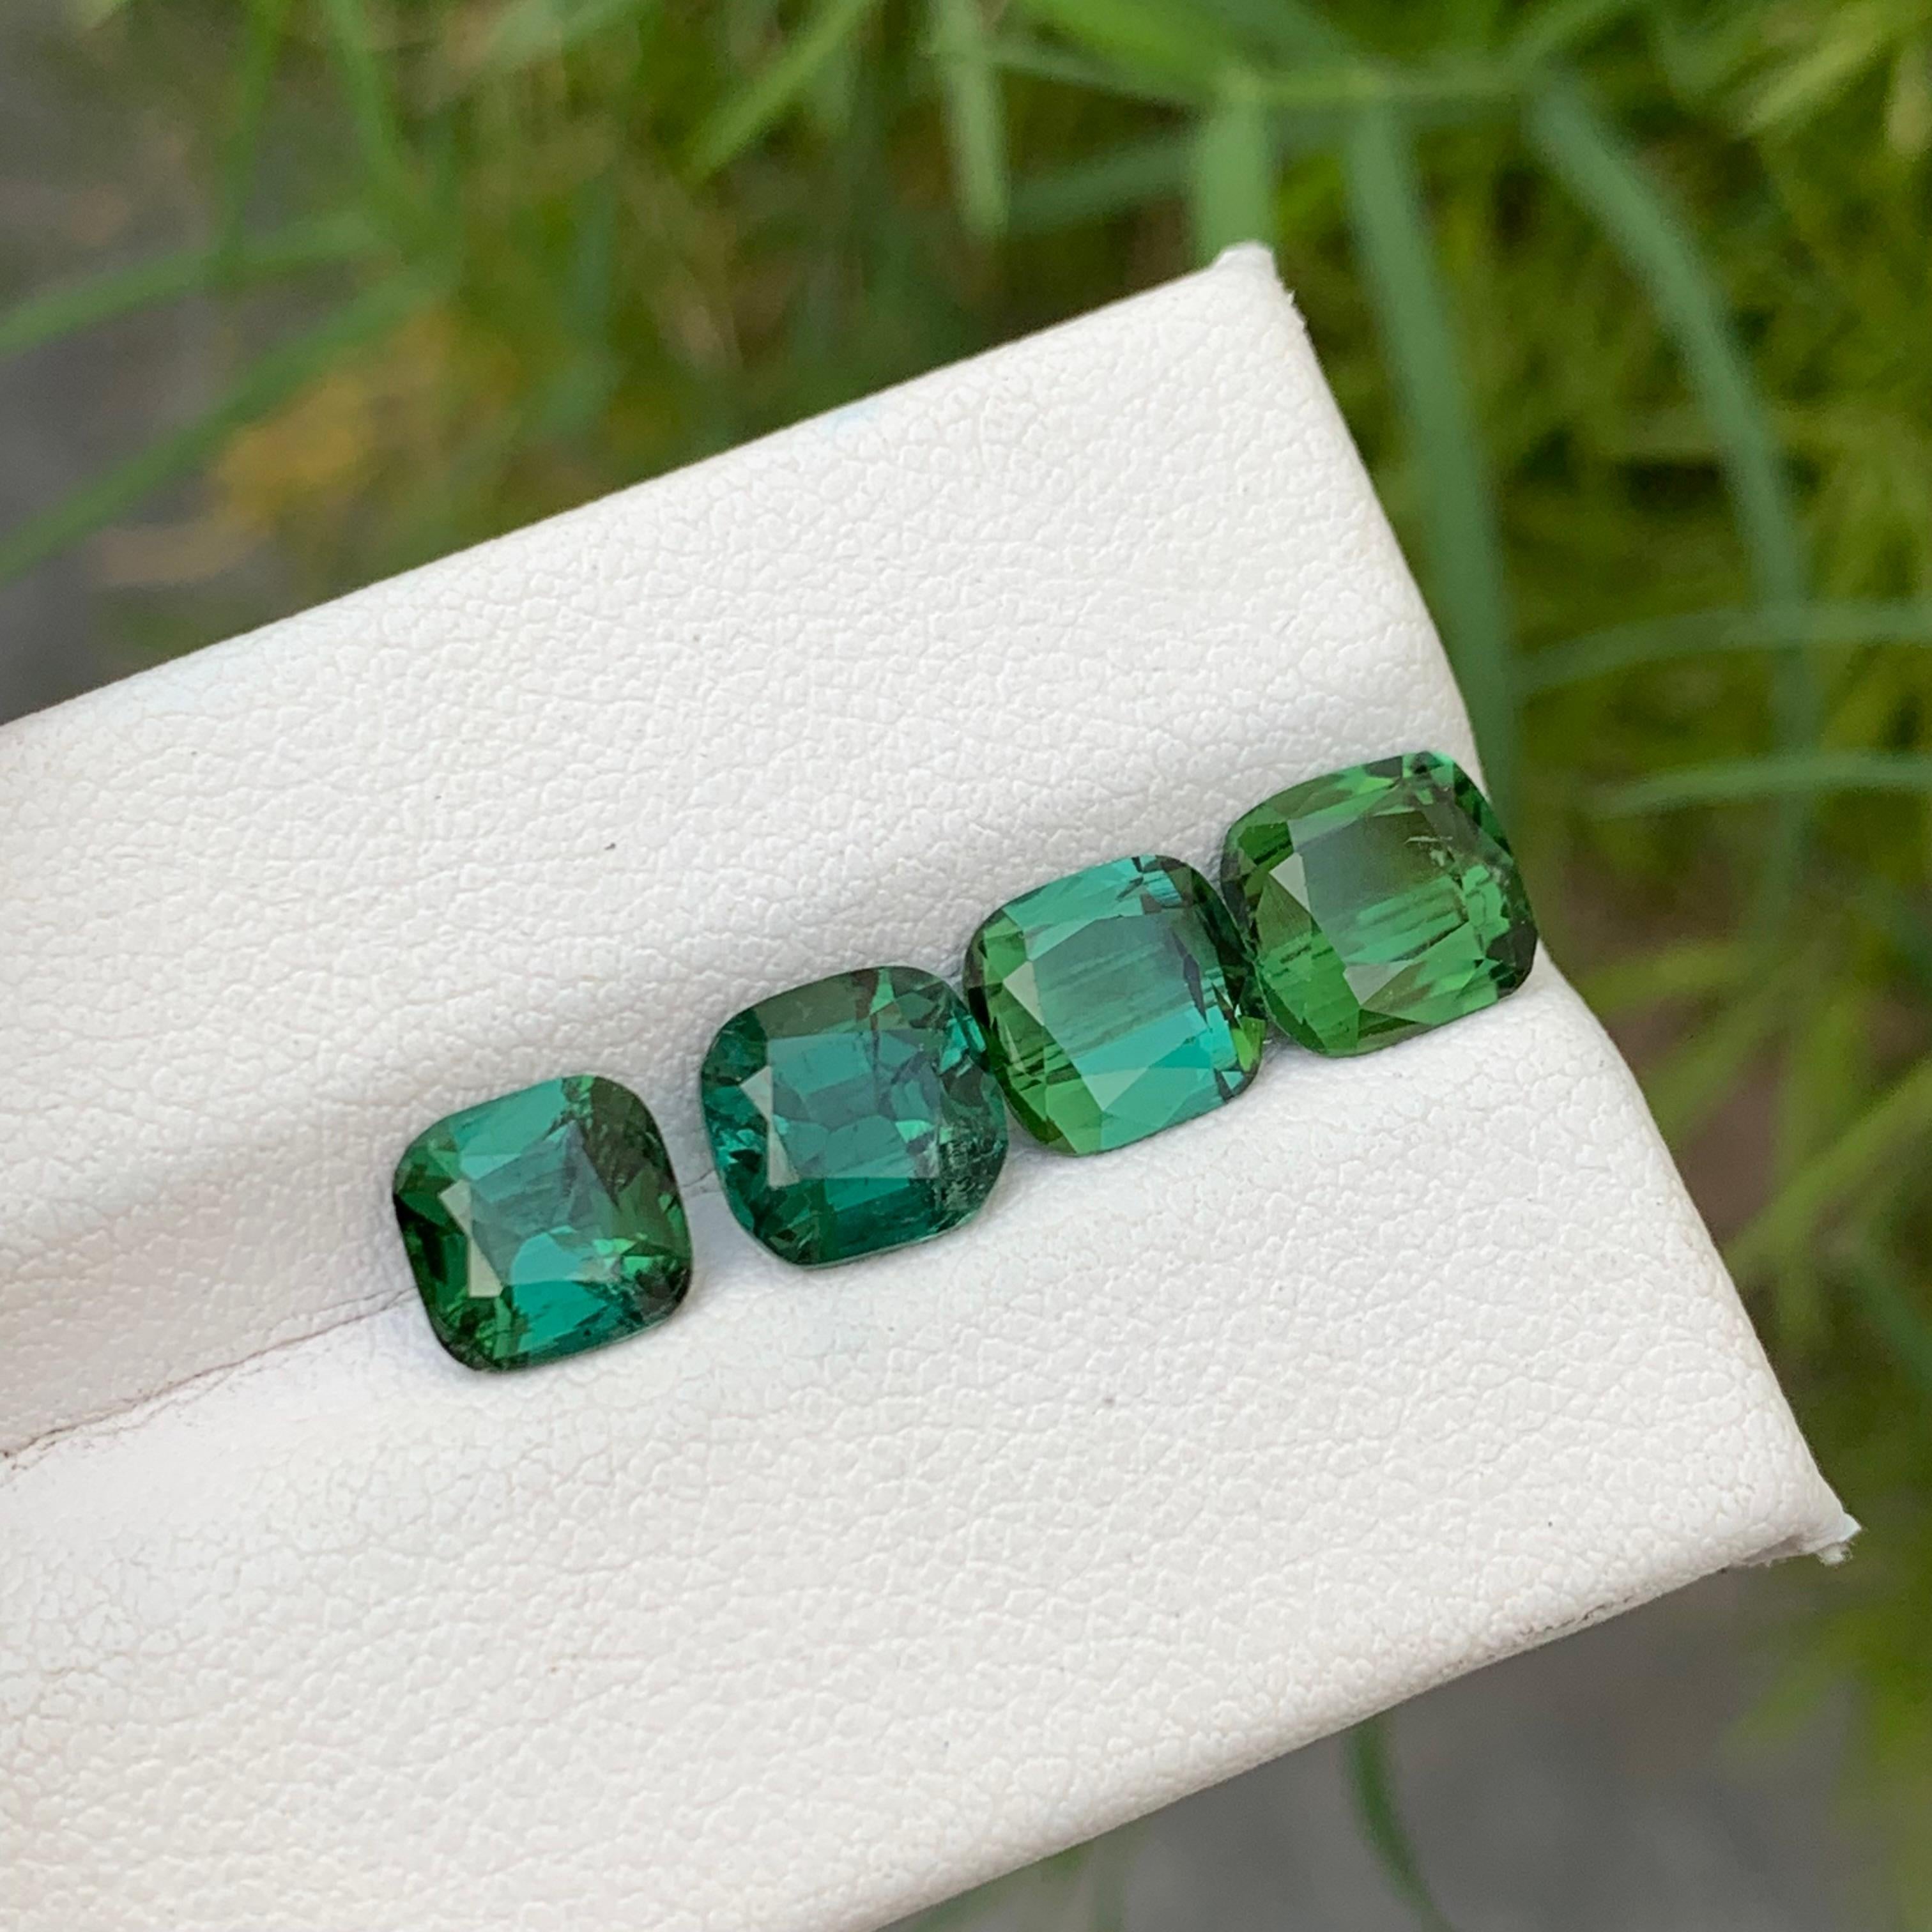 Gemstone Type : Tourmaline
Weight : 5.20 Carats
Sizes: 1.15 to 1.40 Carat
Origin : Kunar Afghanistan
Clarity : SI
Shape: Cushion
Color: Bluish green ( Lagoon)
Certificate: On Demand
Basically, mint tourmalines are tourmalines with pastel hues of